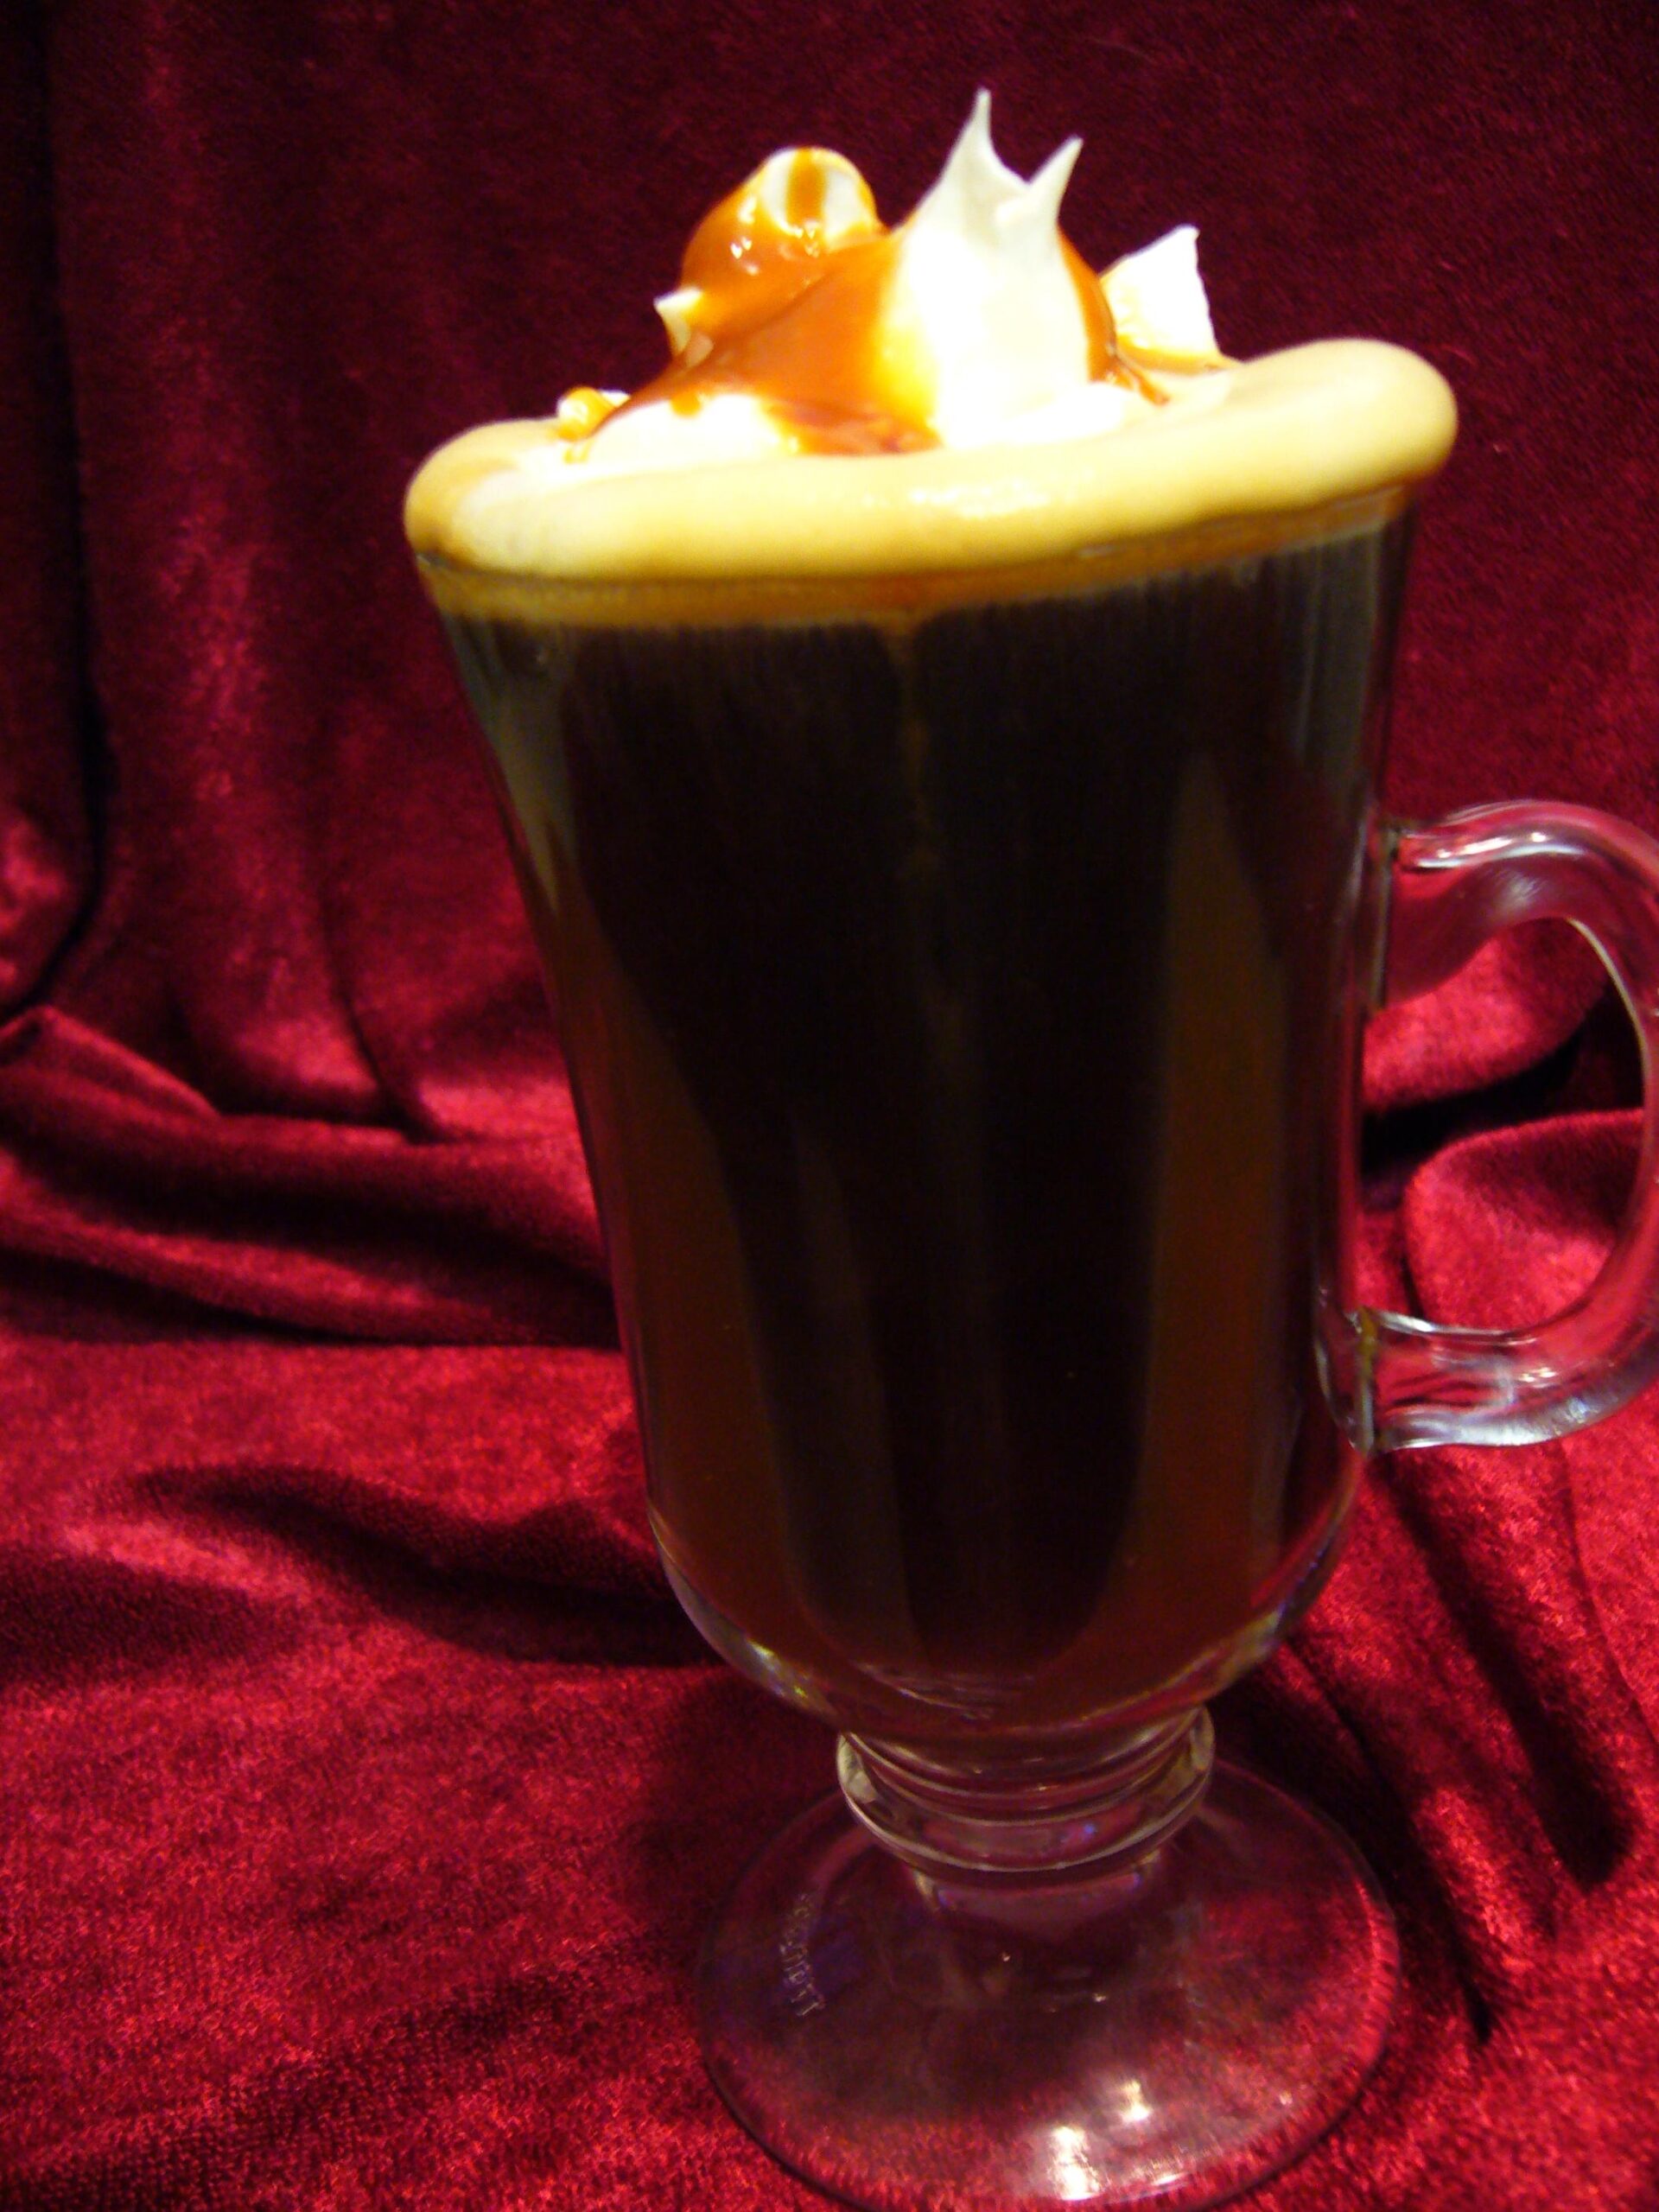  Satisfy your sweet tooth with a cup of Caramel Butterscotch Coffee!